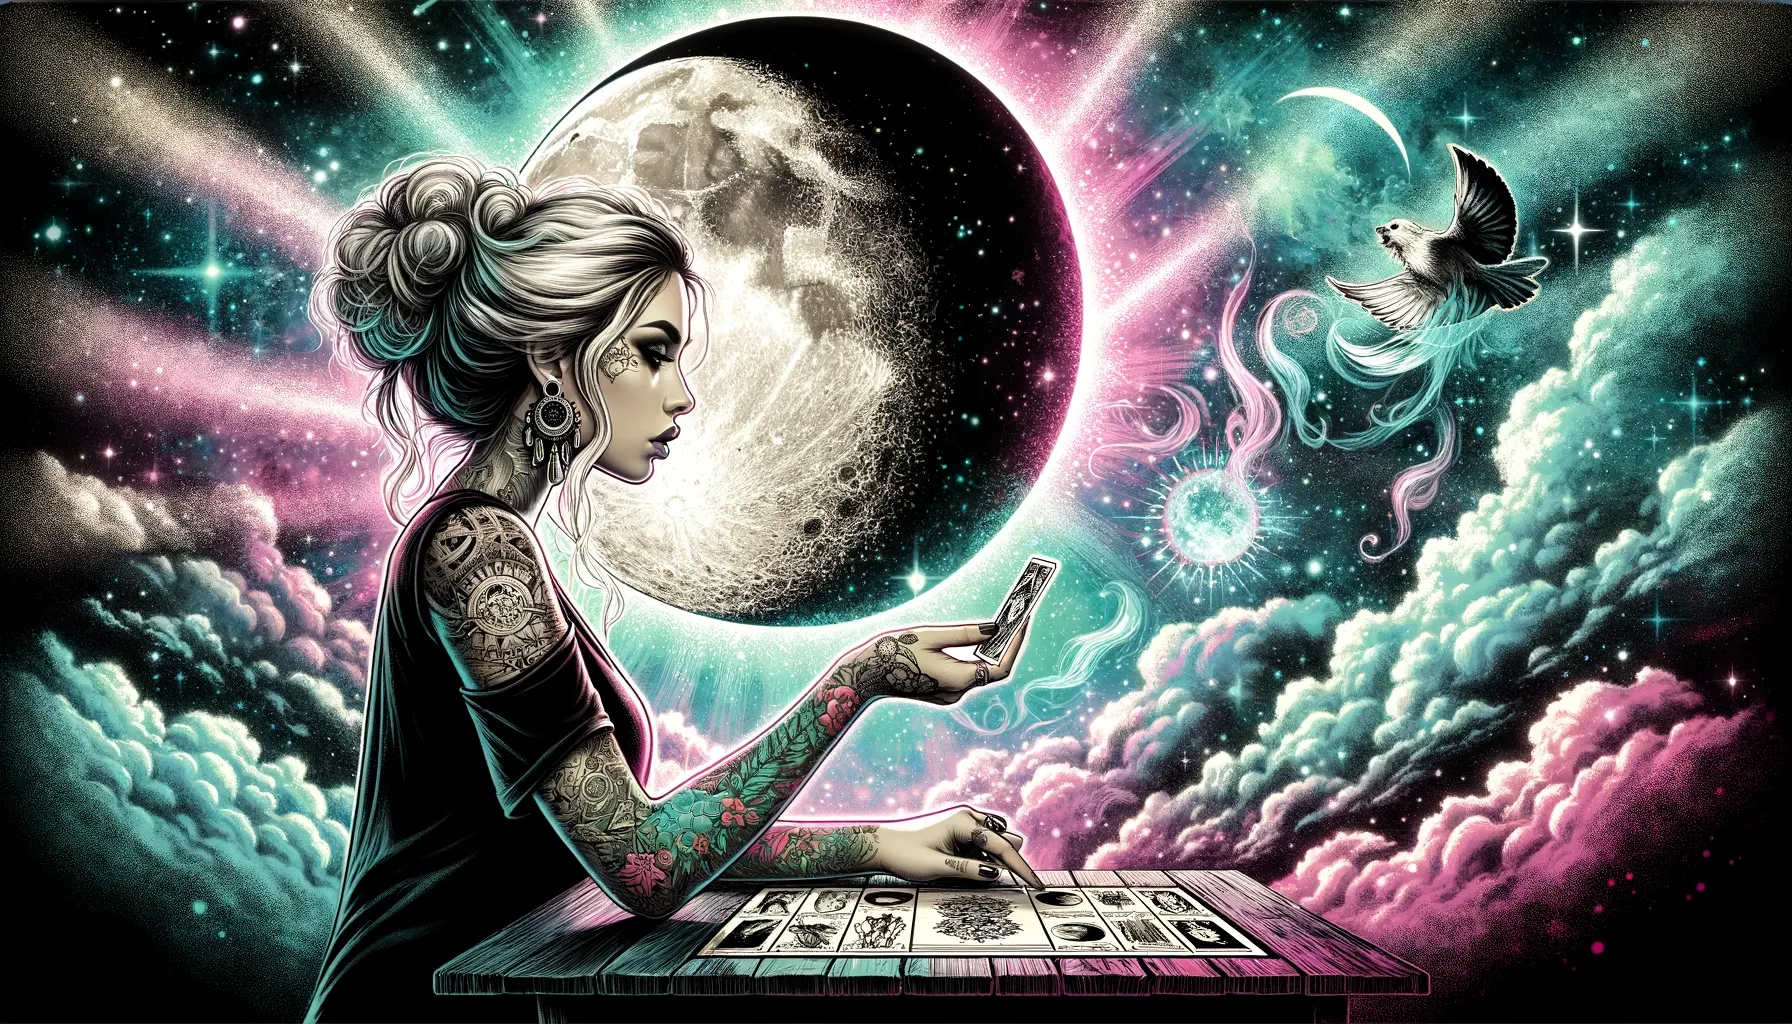 A woman with tattoos is checking a moon chart and holding a card in front of the Waning Gibbous moon.